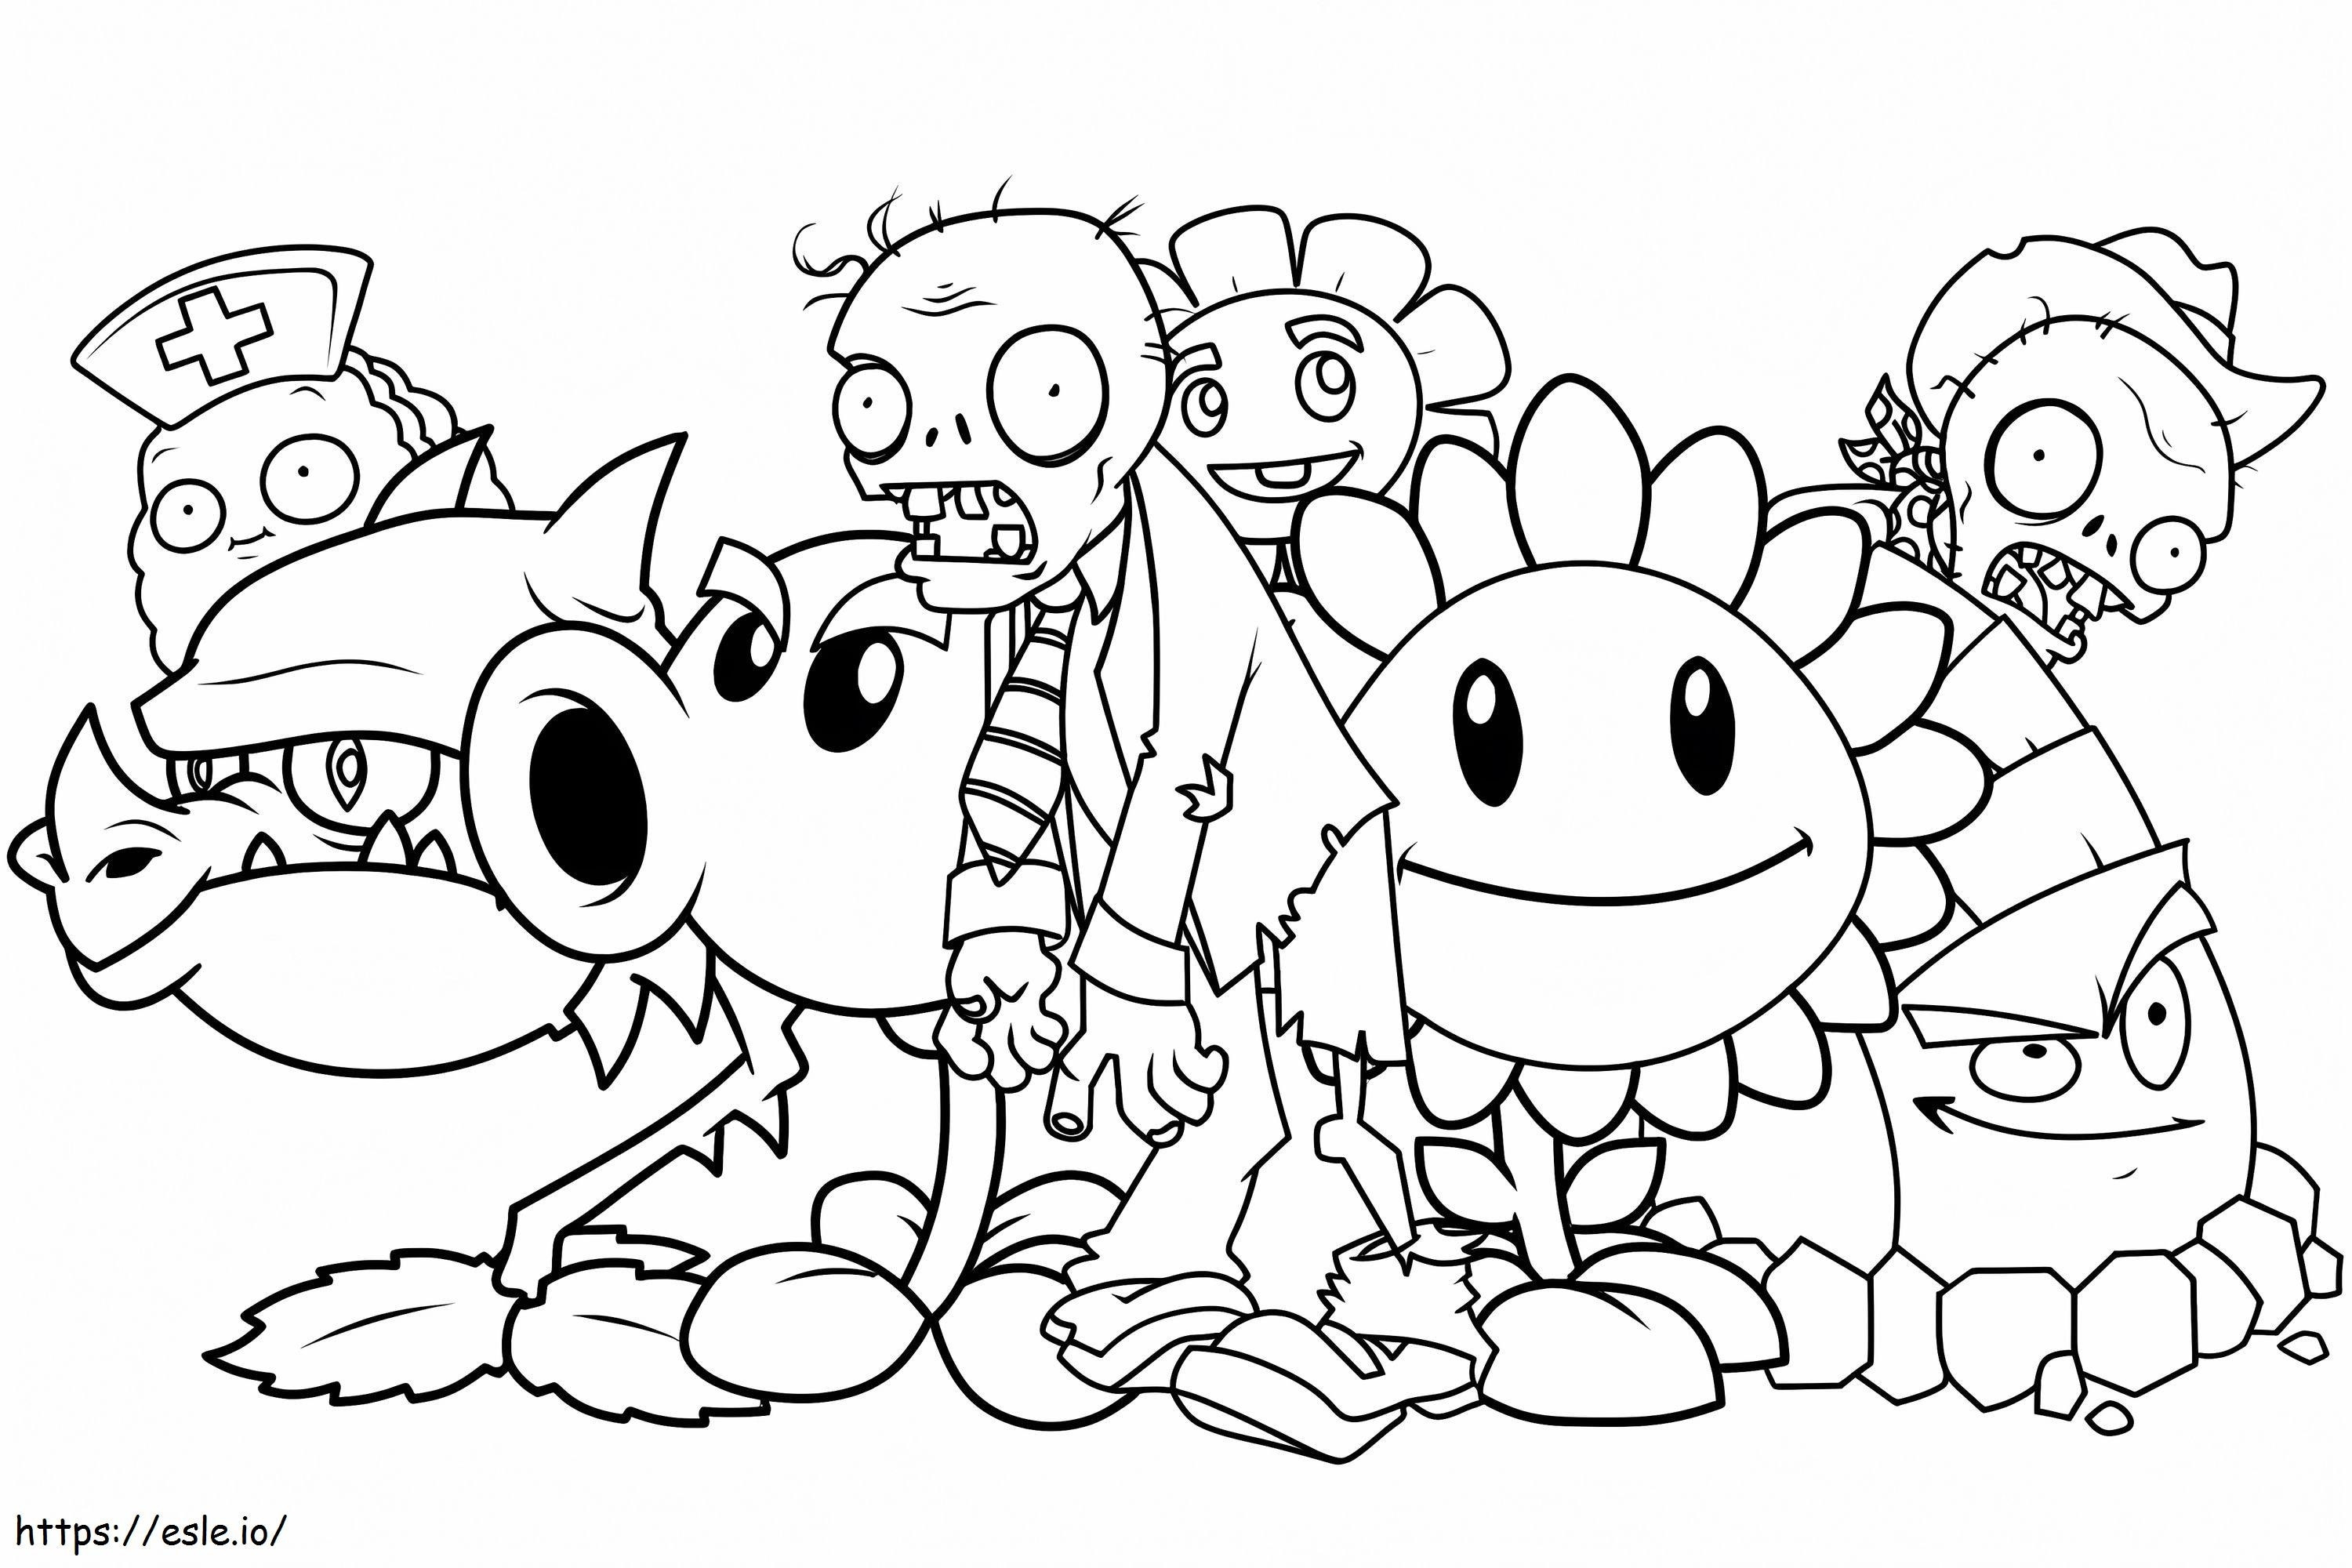 All Plants Vs Zombies Characters coloring page